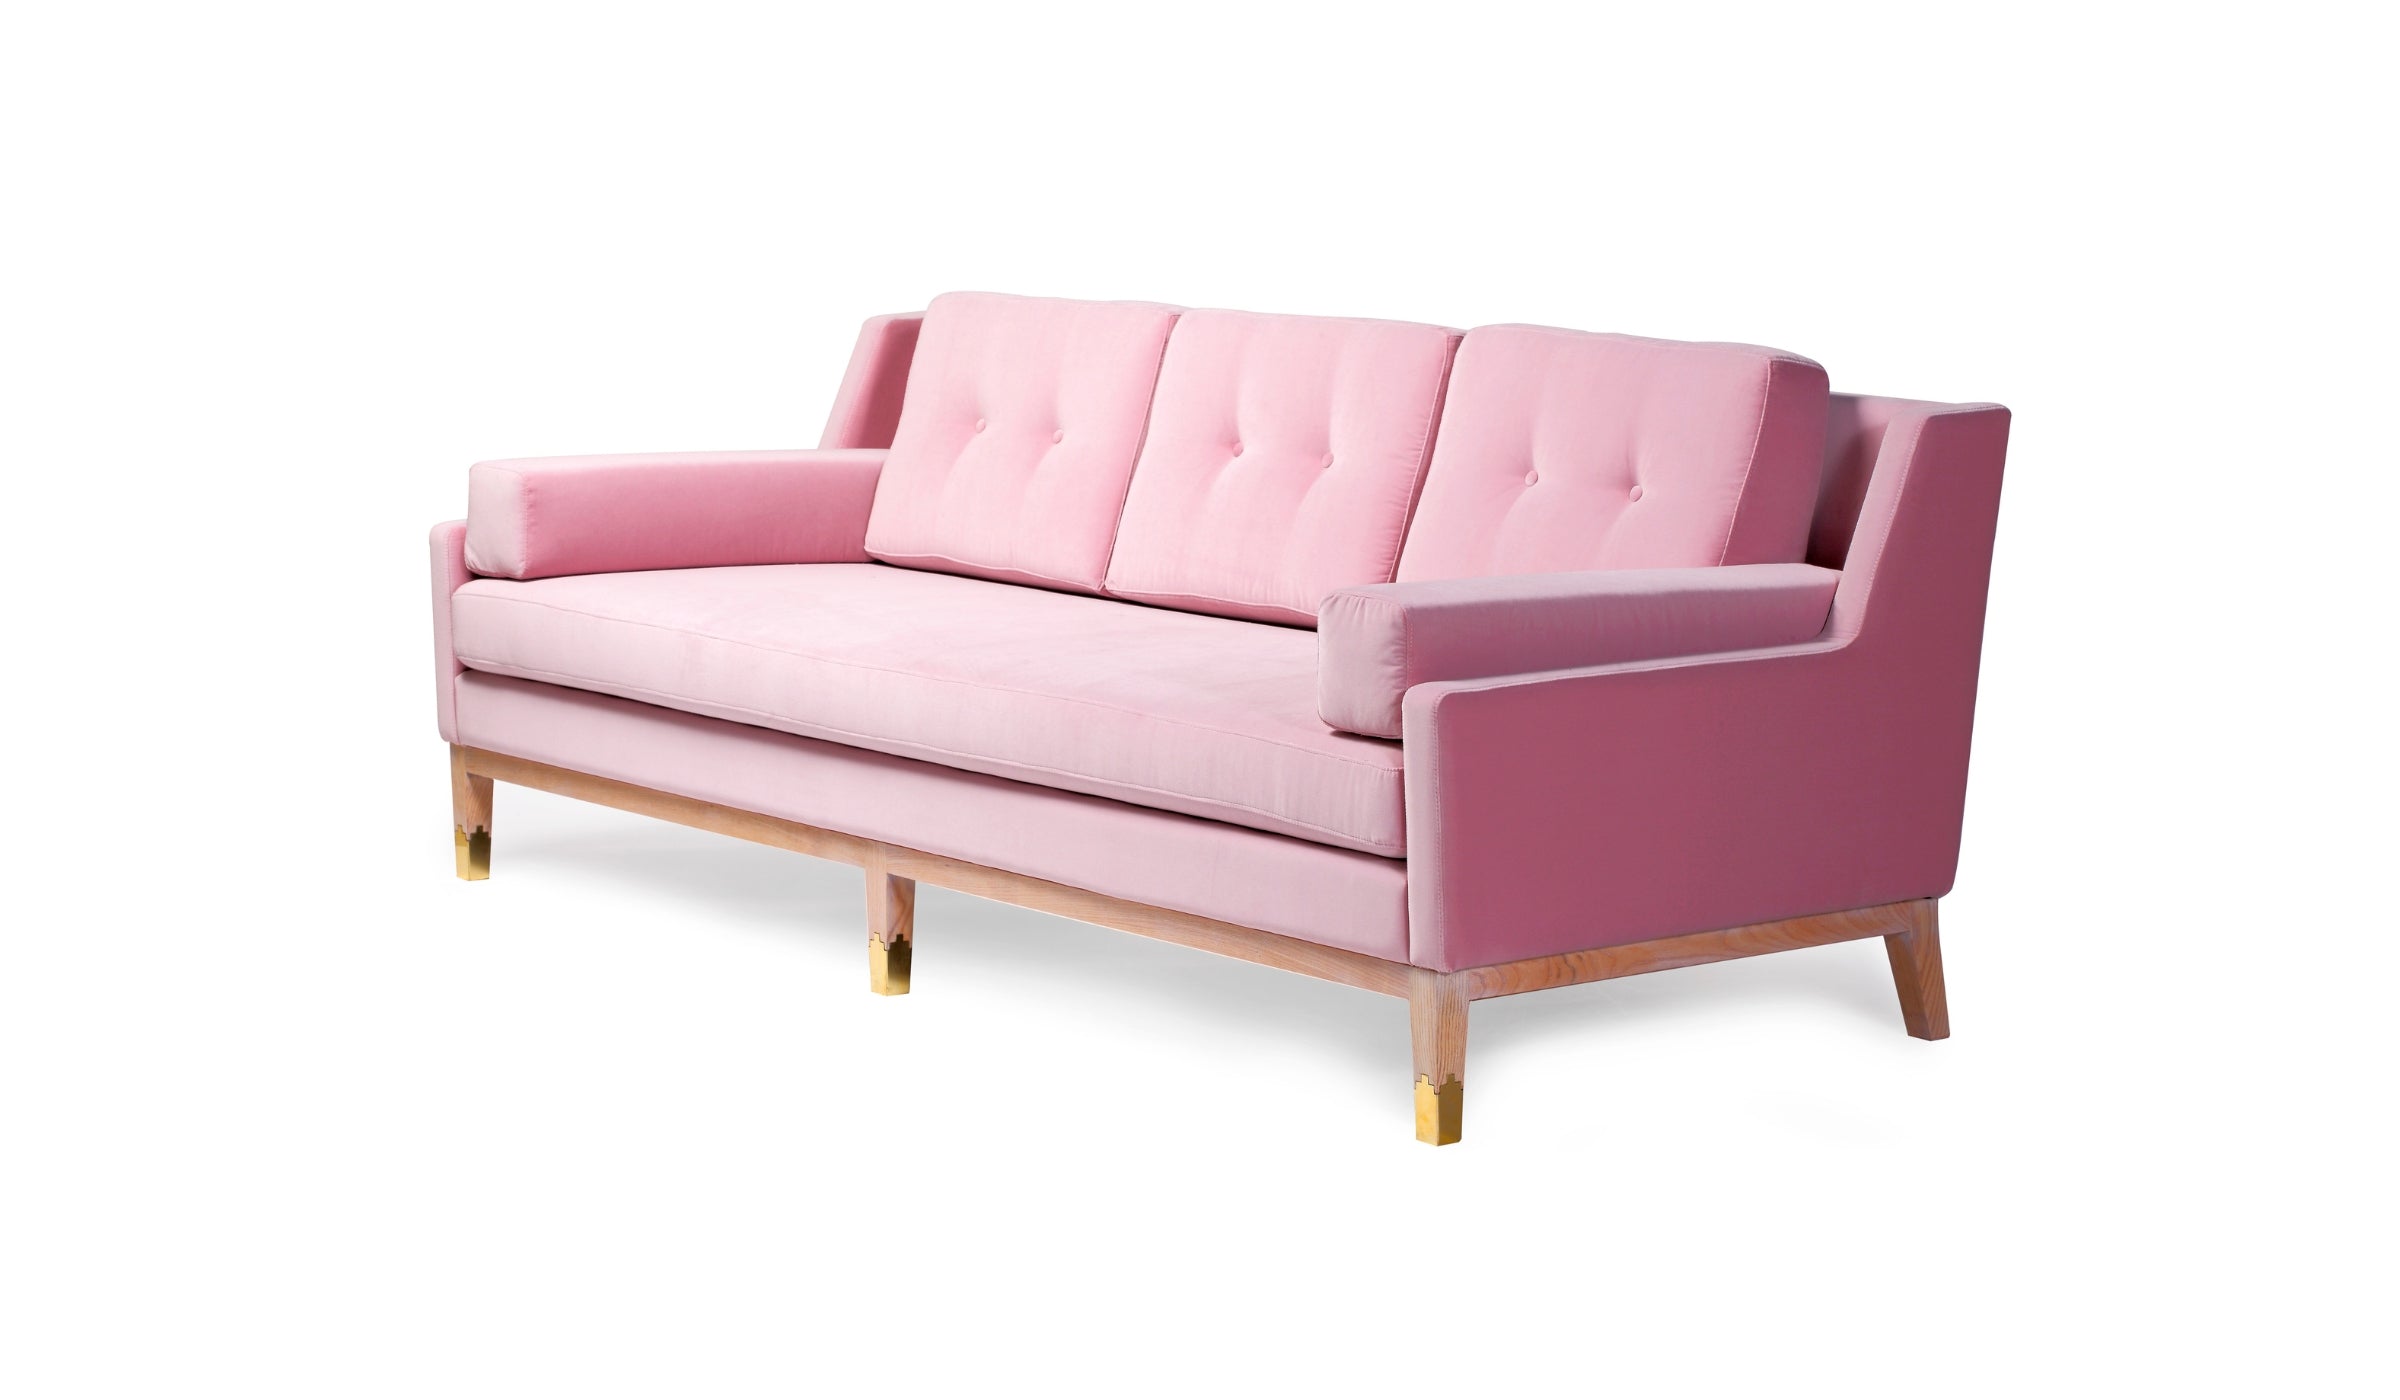 Mr. Jones - Sofa in exceptional pink fabric and limed oak